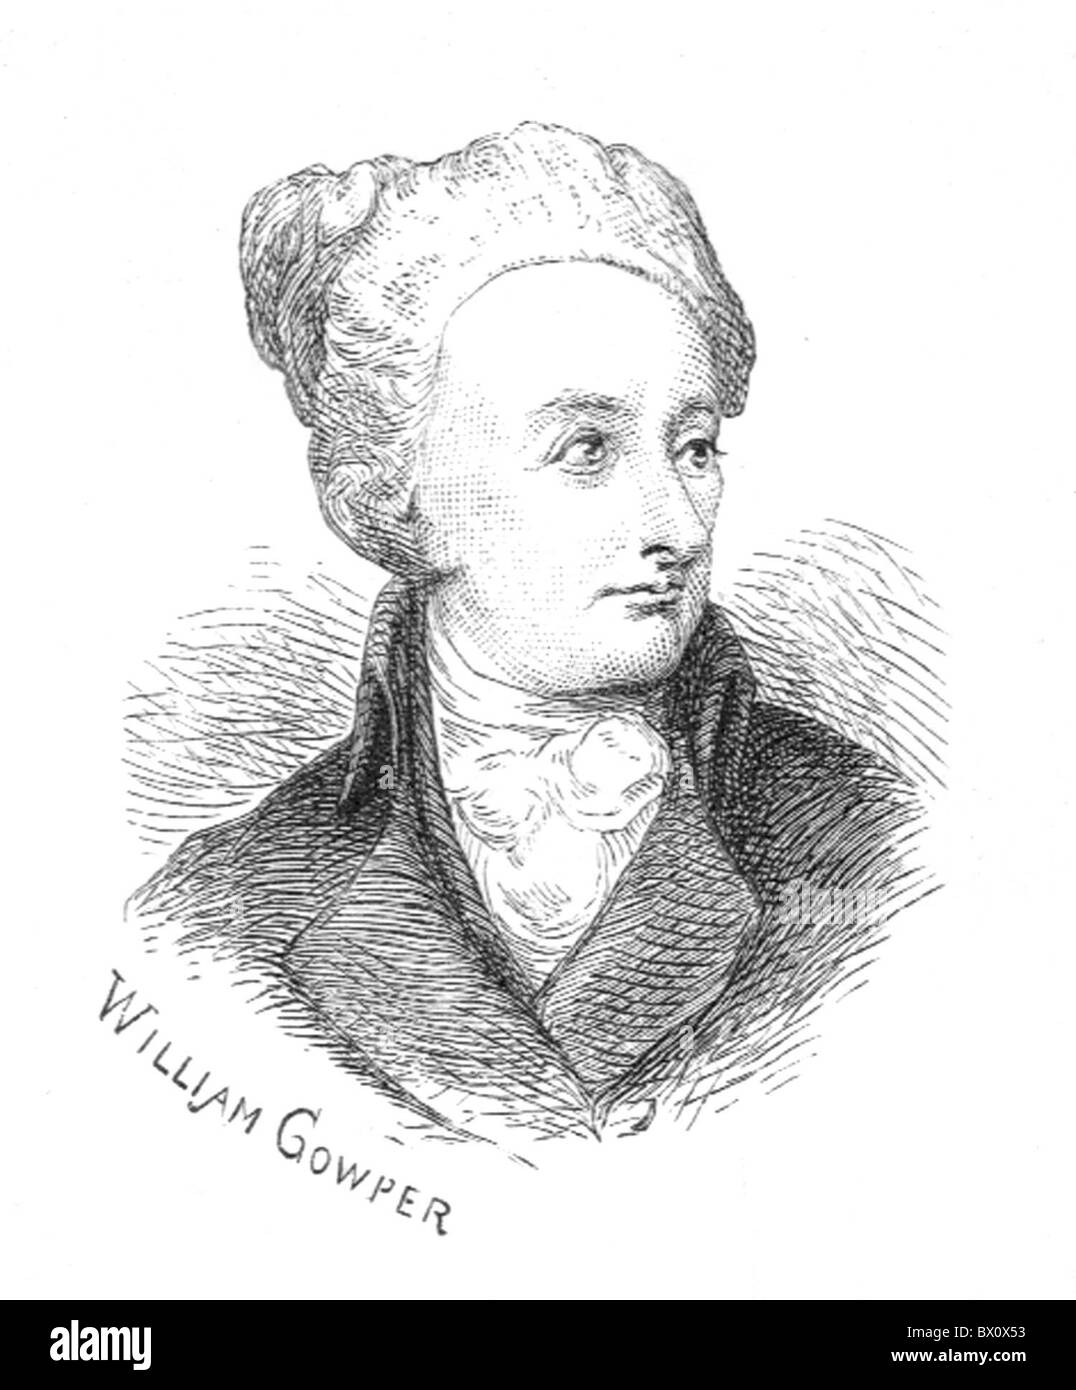 Archive image of historical literary figures. This is poet William Cowper. (1731-1800) Stock Photo